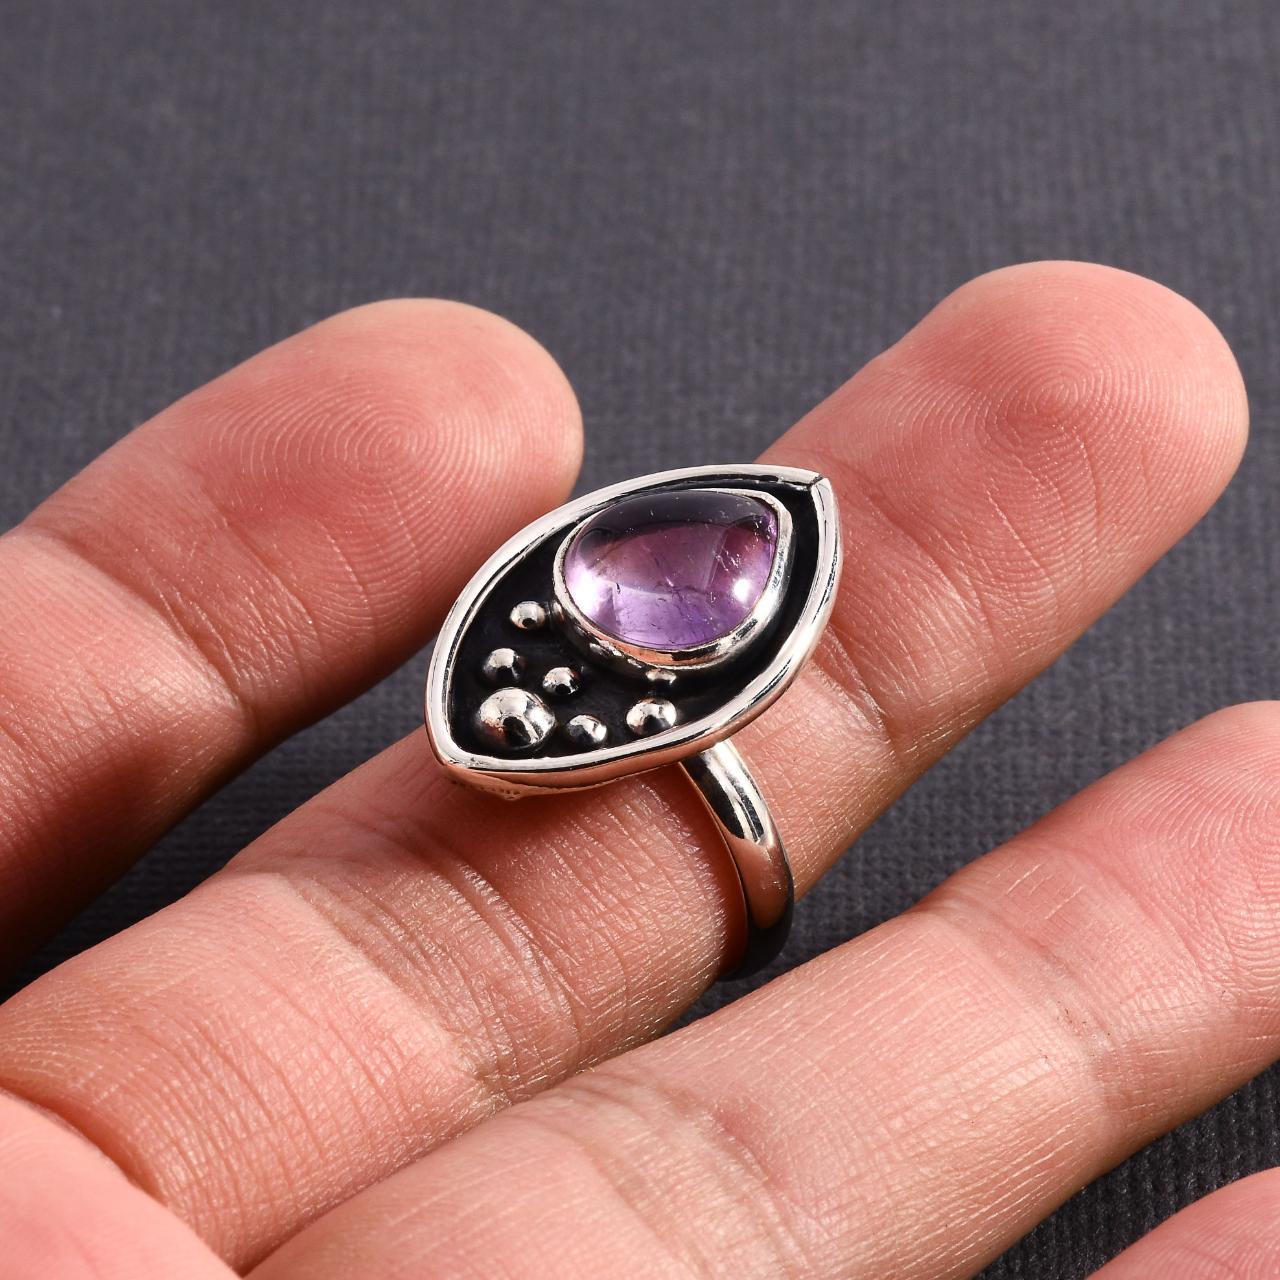 Product Image 2 - Sterling 925 Amethyst Ring

Sterling Silver

Size